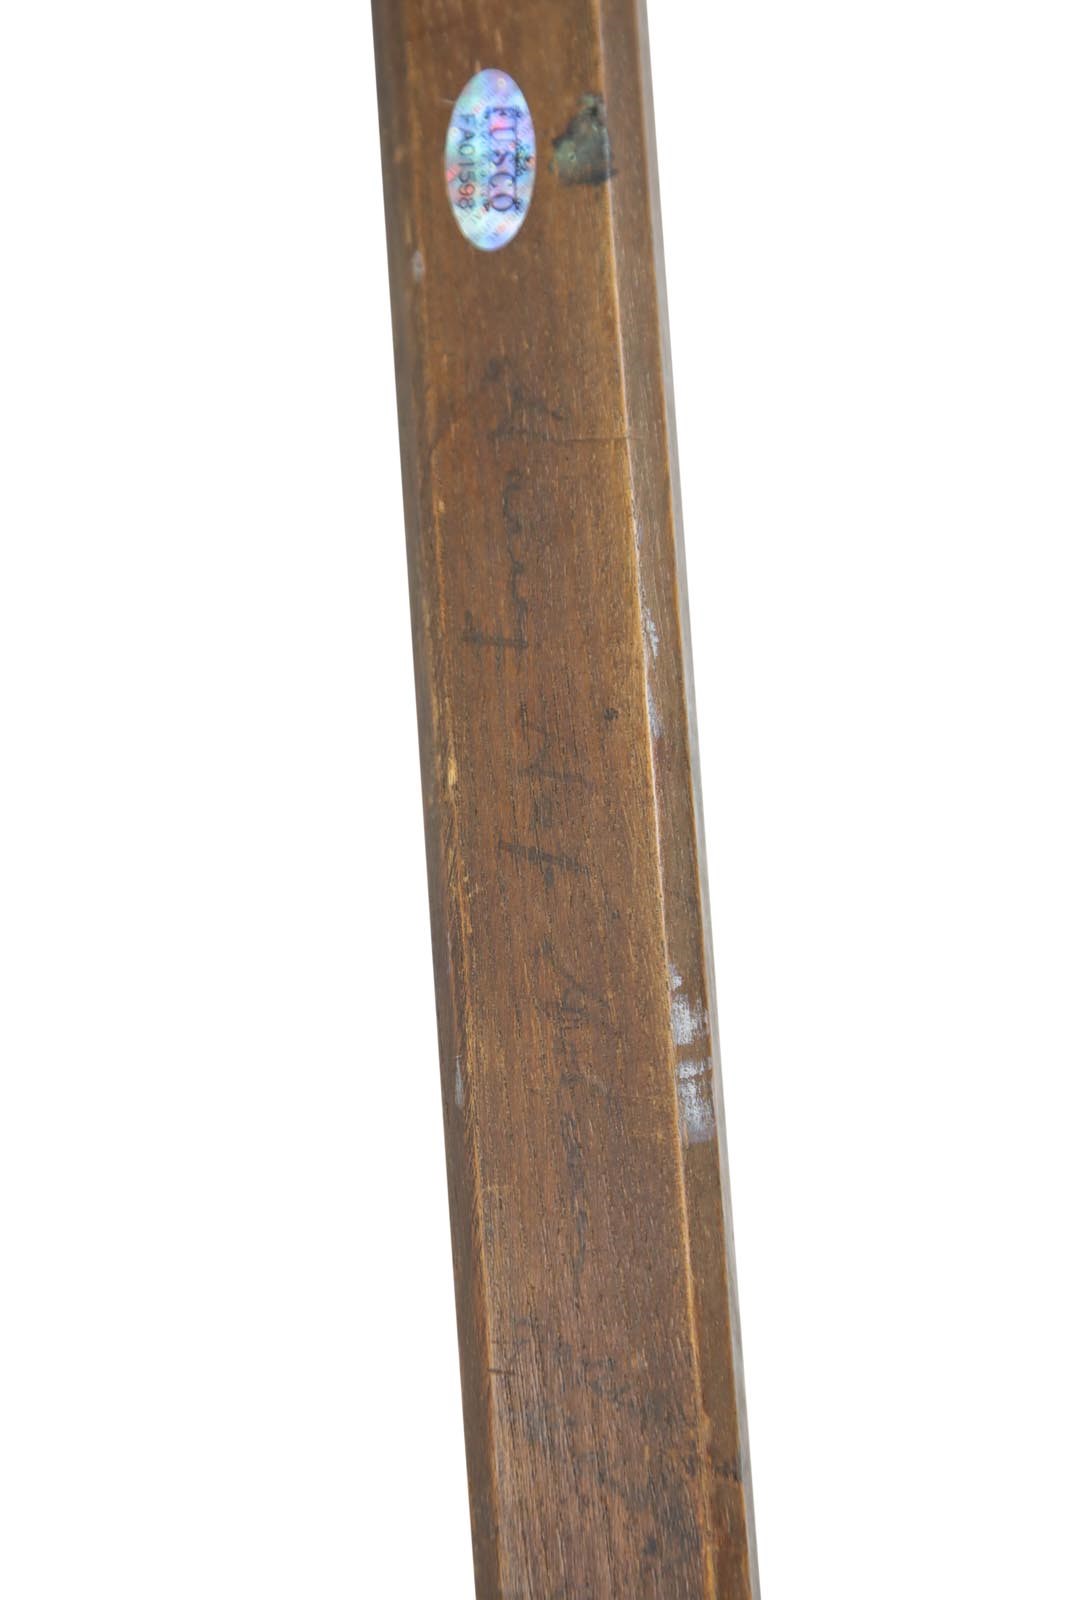 1935-36 Cleveland Falcons Team Signed Stick with Hap Holmes (PSA)